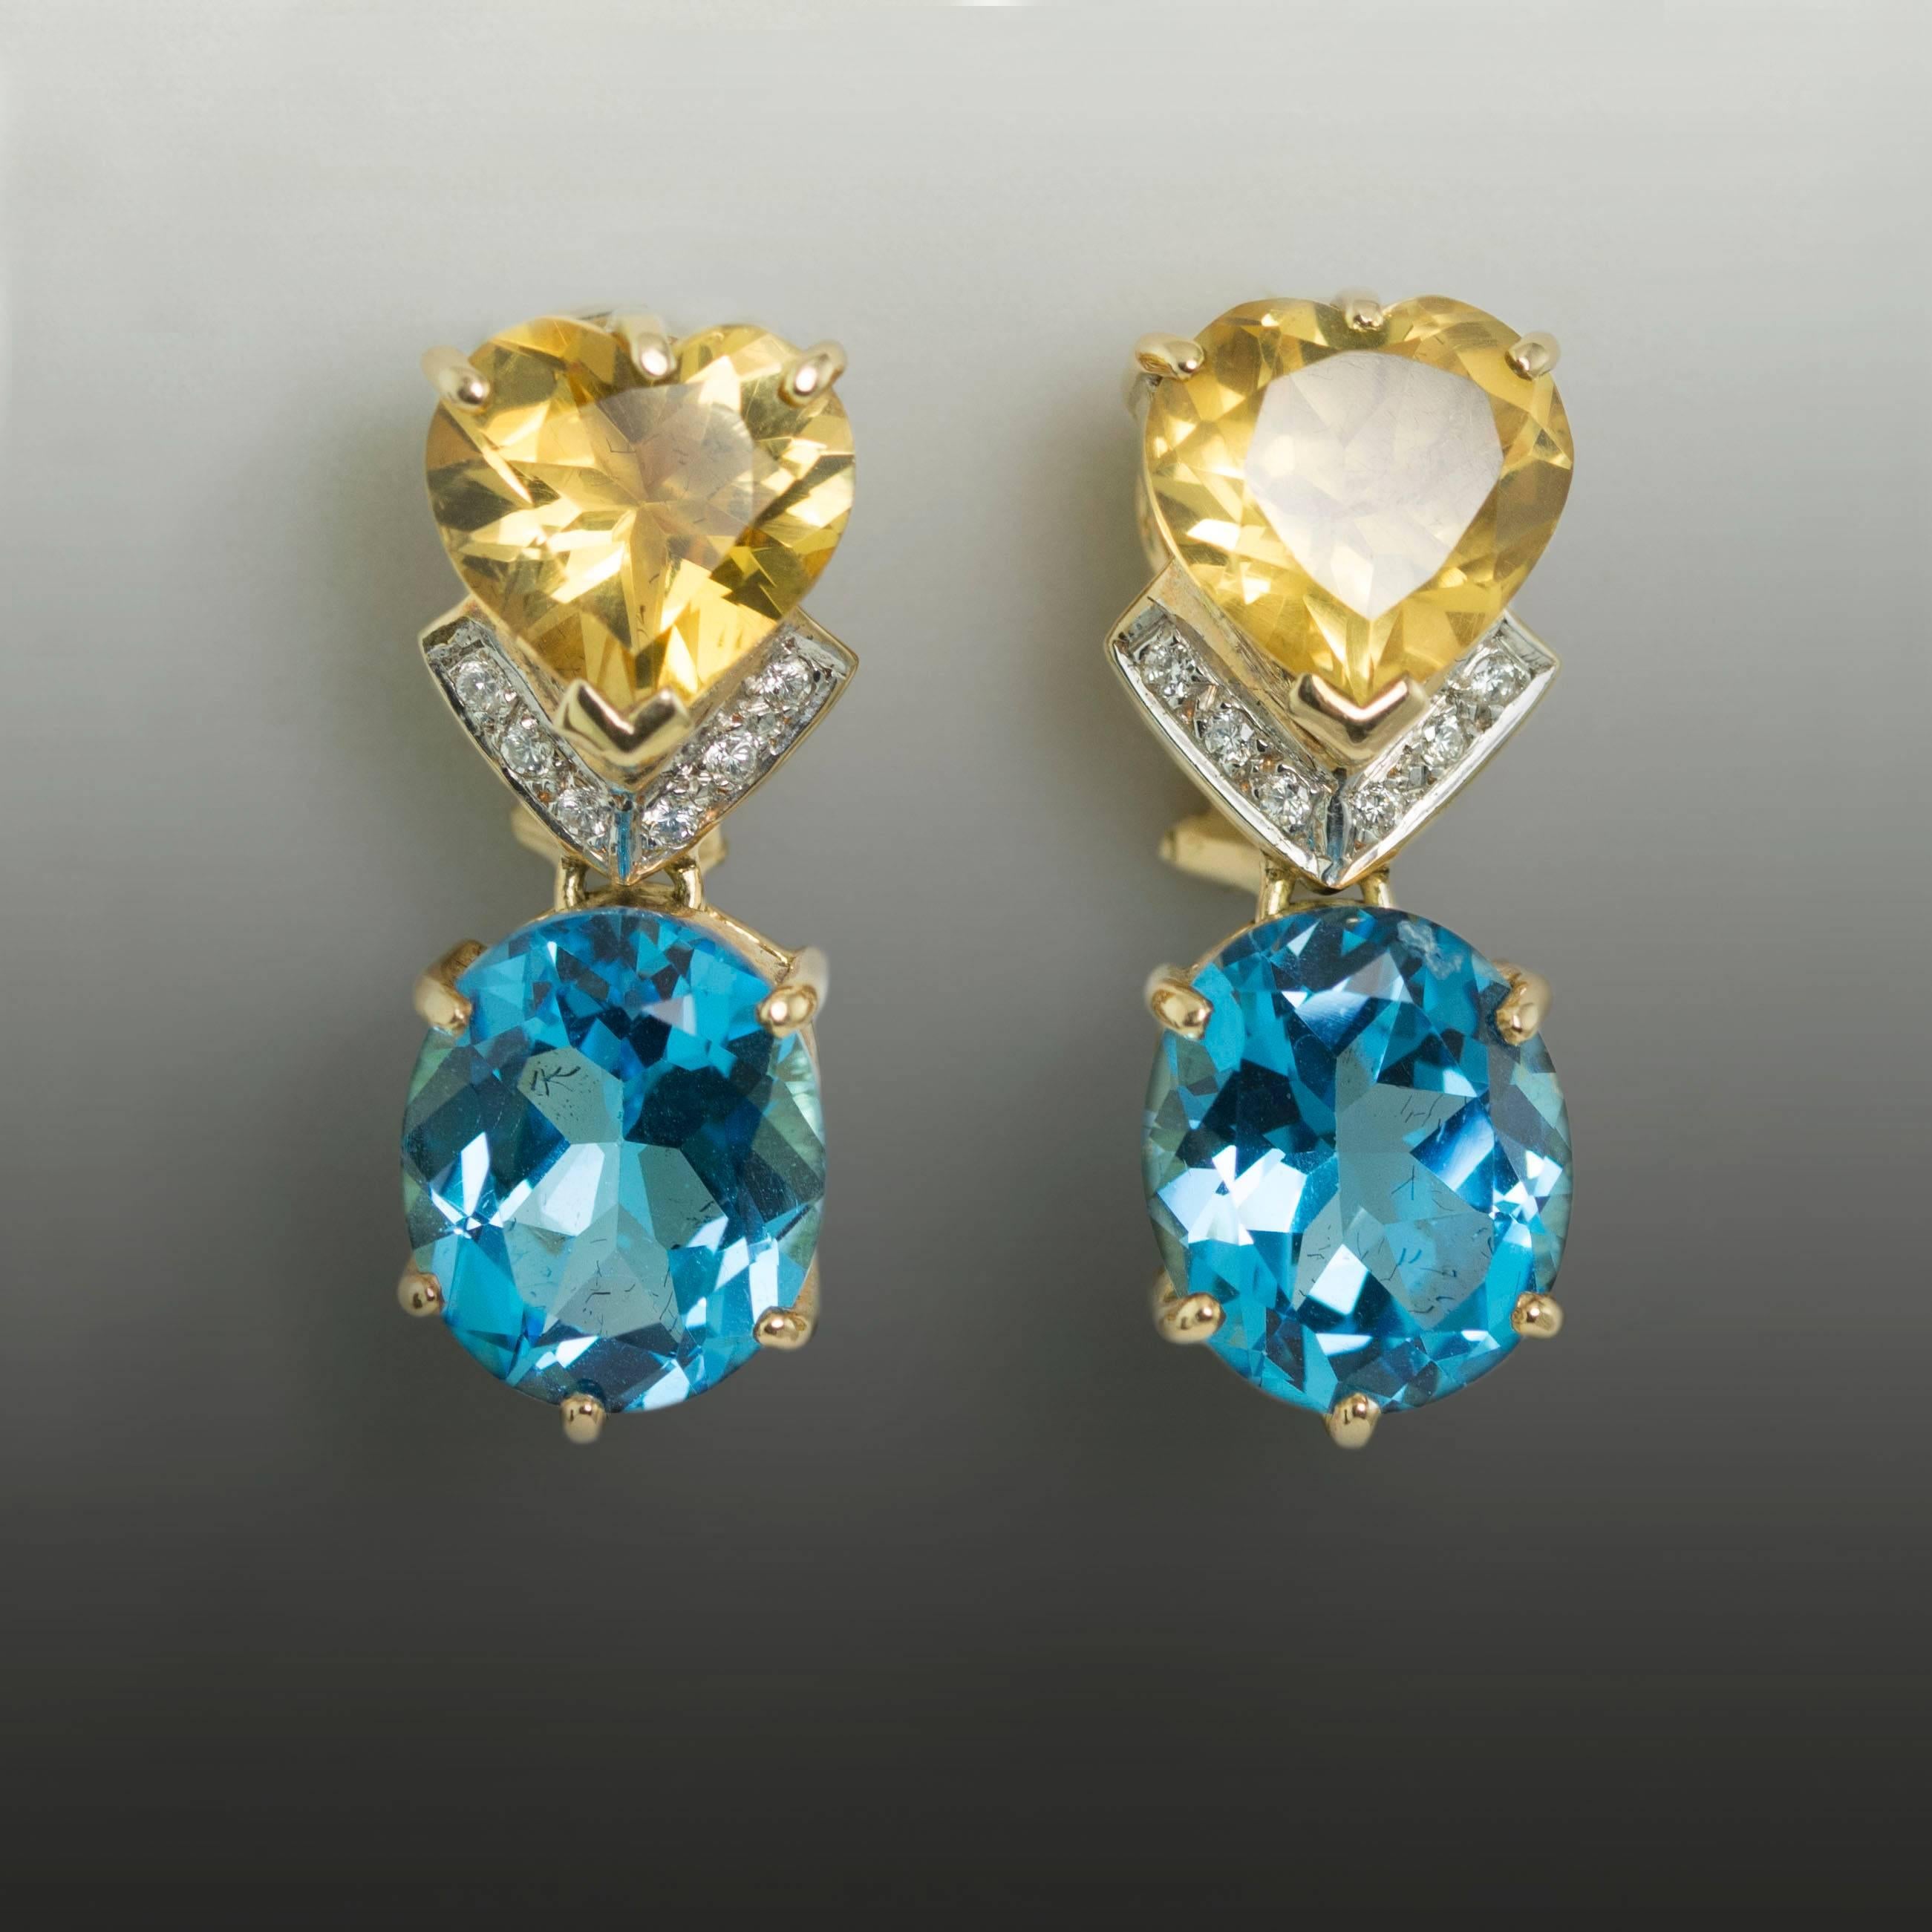 14K Earrings with 2 Oval Blue Topaz Weighing 11.40 Carats and 2 Heart Shape Citrine Weighing 5.30 Carats and Diamonds Weighing 0.18 Carats.